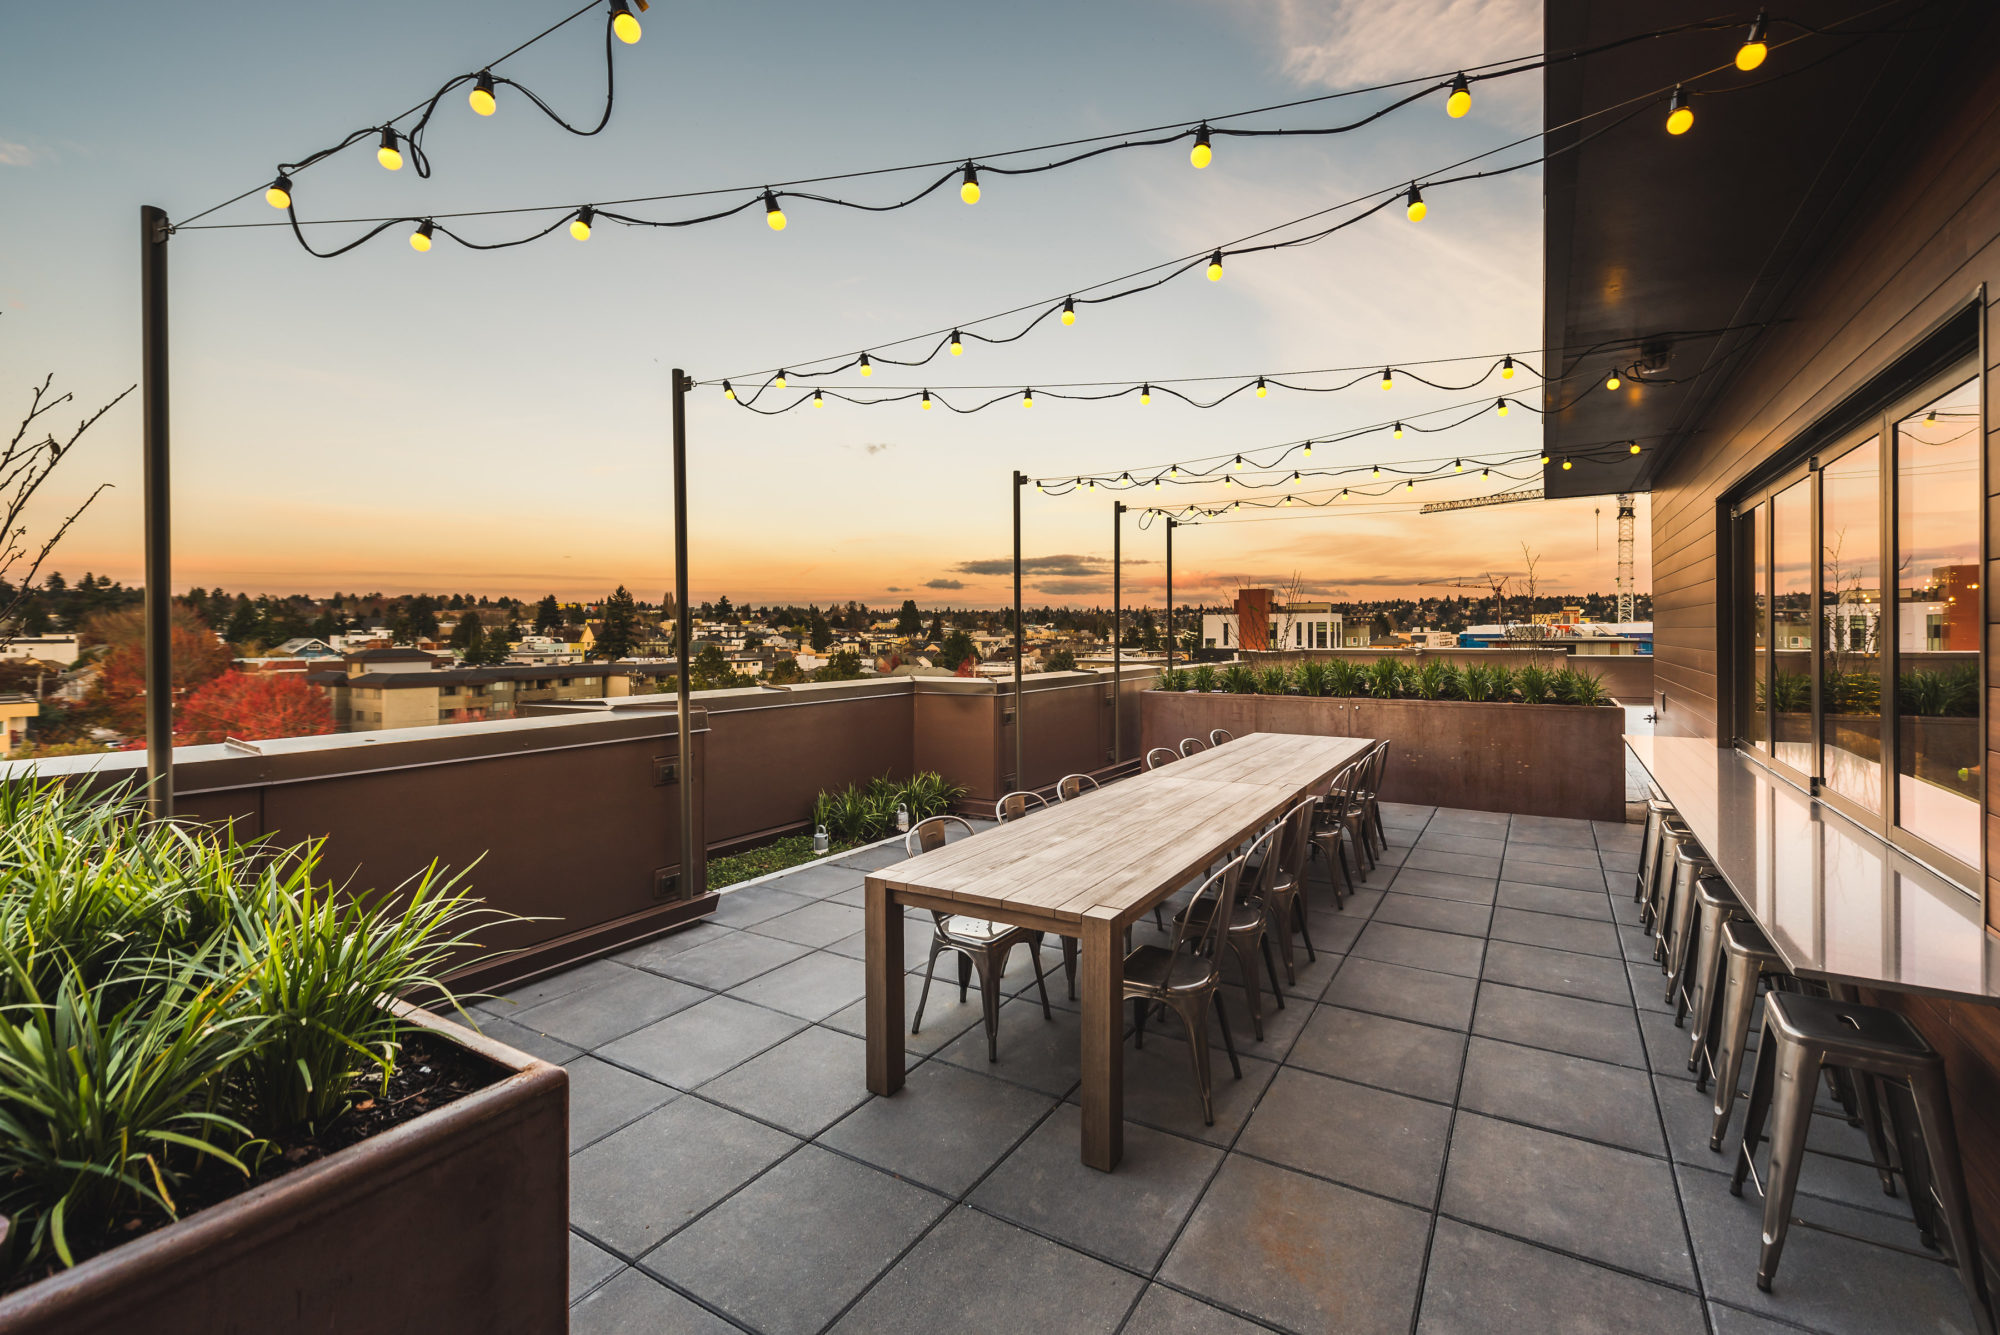 Rooftop deck with overhead lighting at the Commons at Ballard.